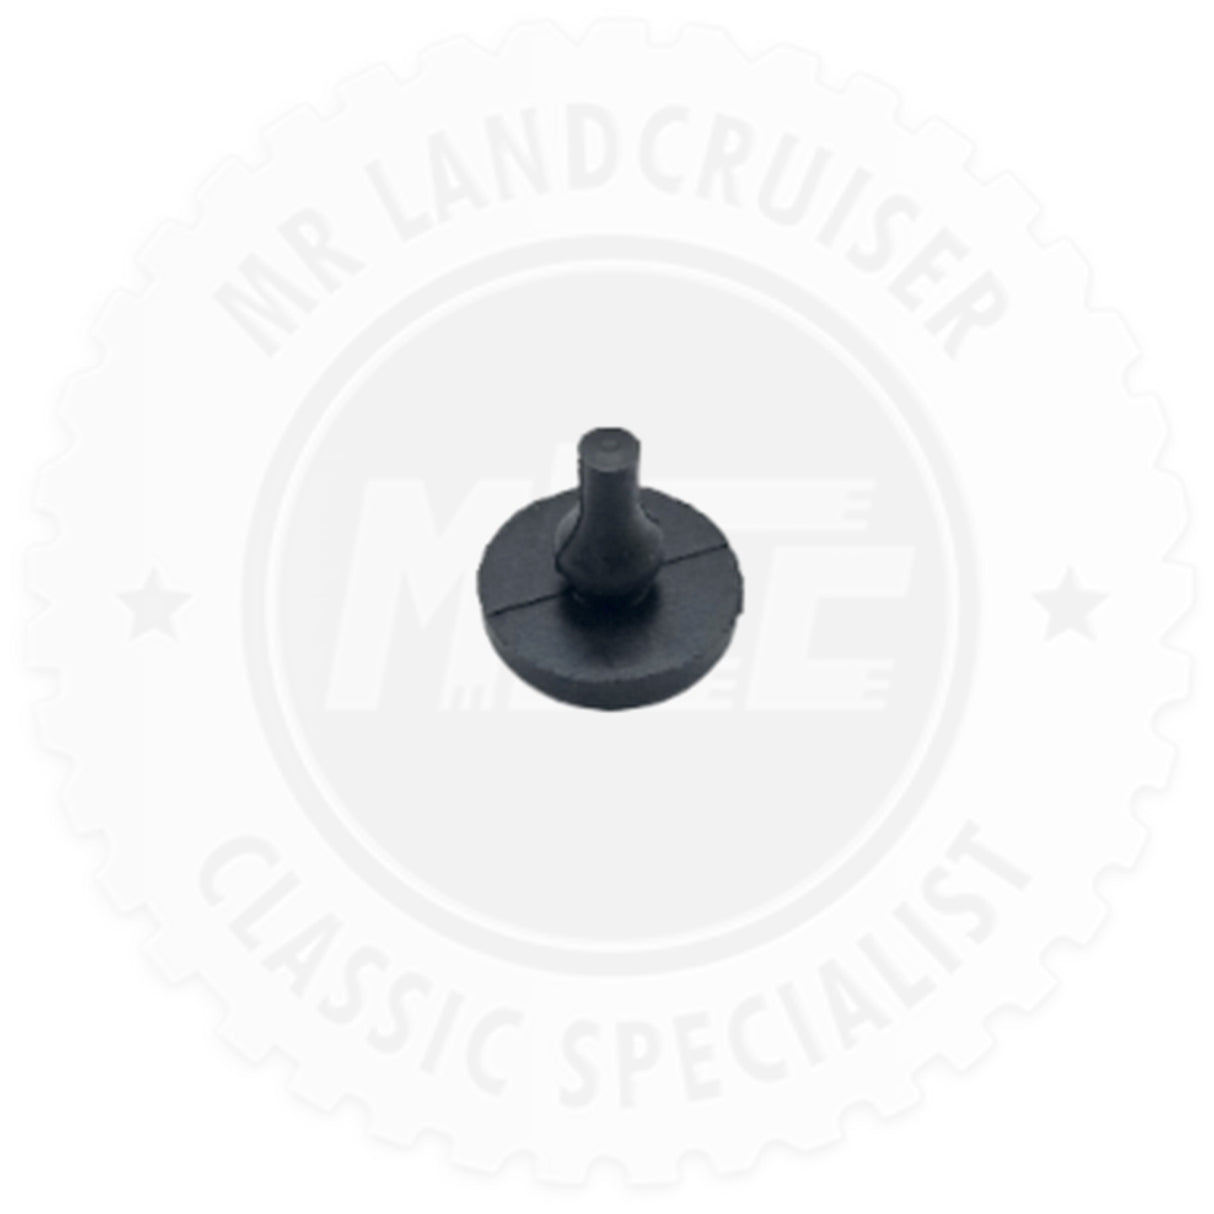 Landcruiser Replacement Rubber Stopper